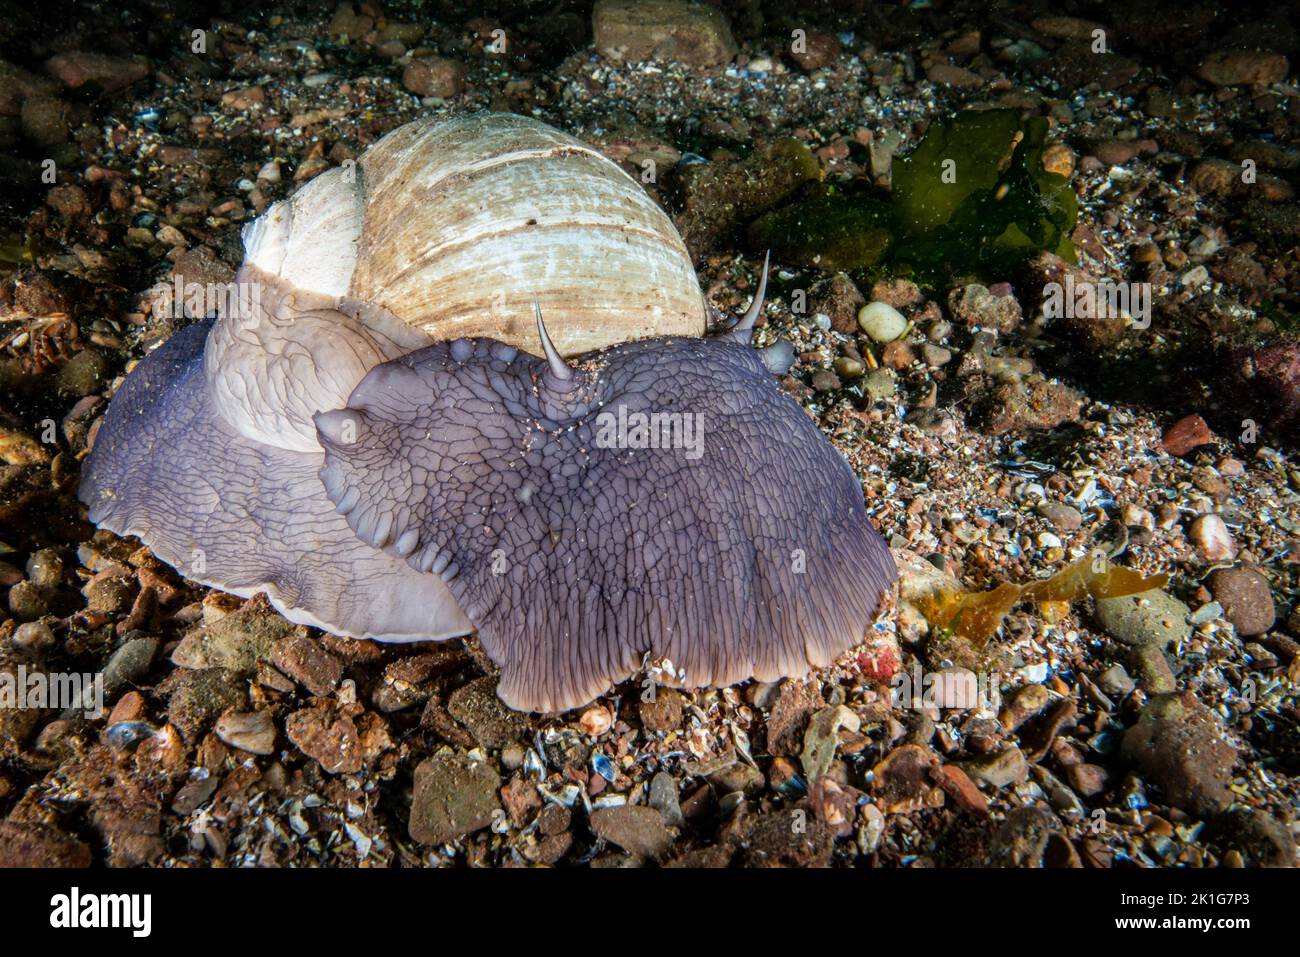 Northern Moon snail underwater in the St. Lawrence River in Canada Stock Photo